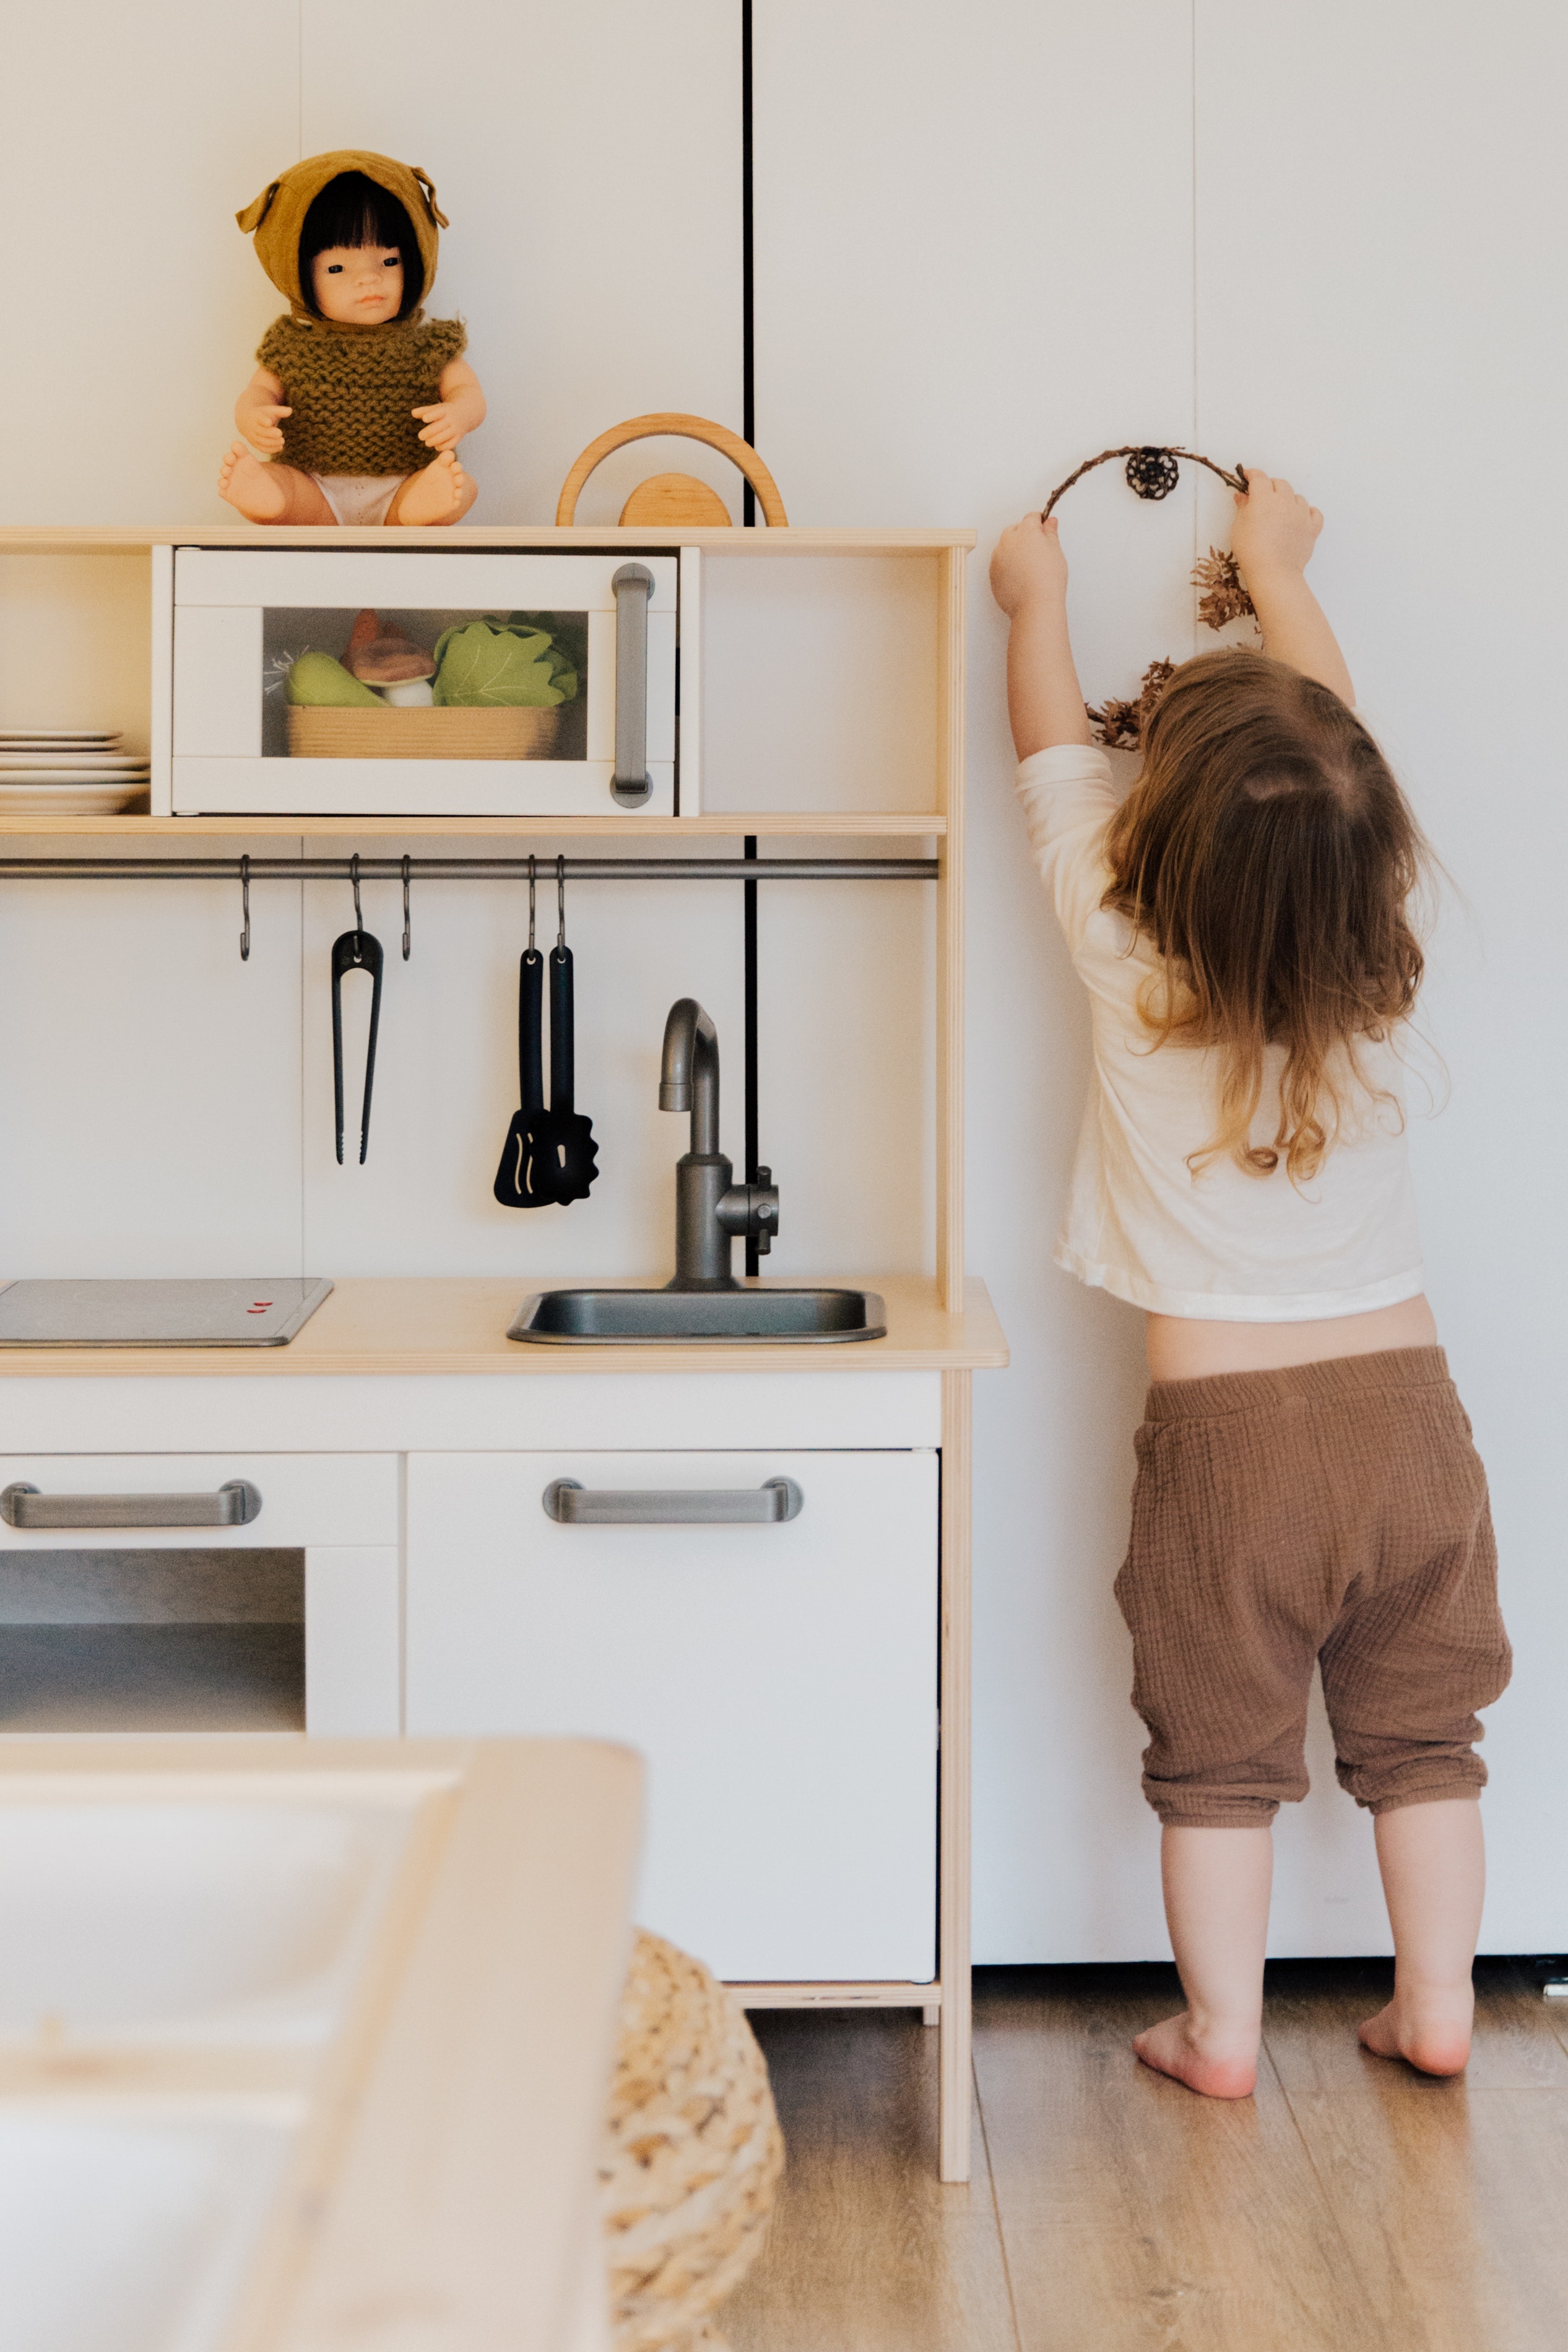 Young Girl Playing in Kitchen Playset